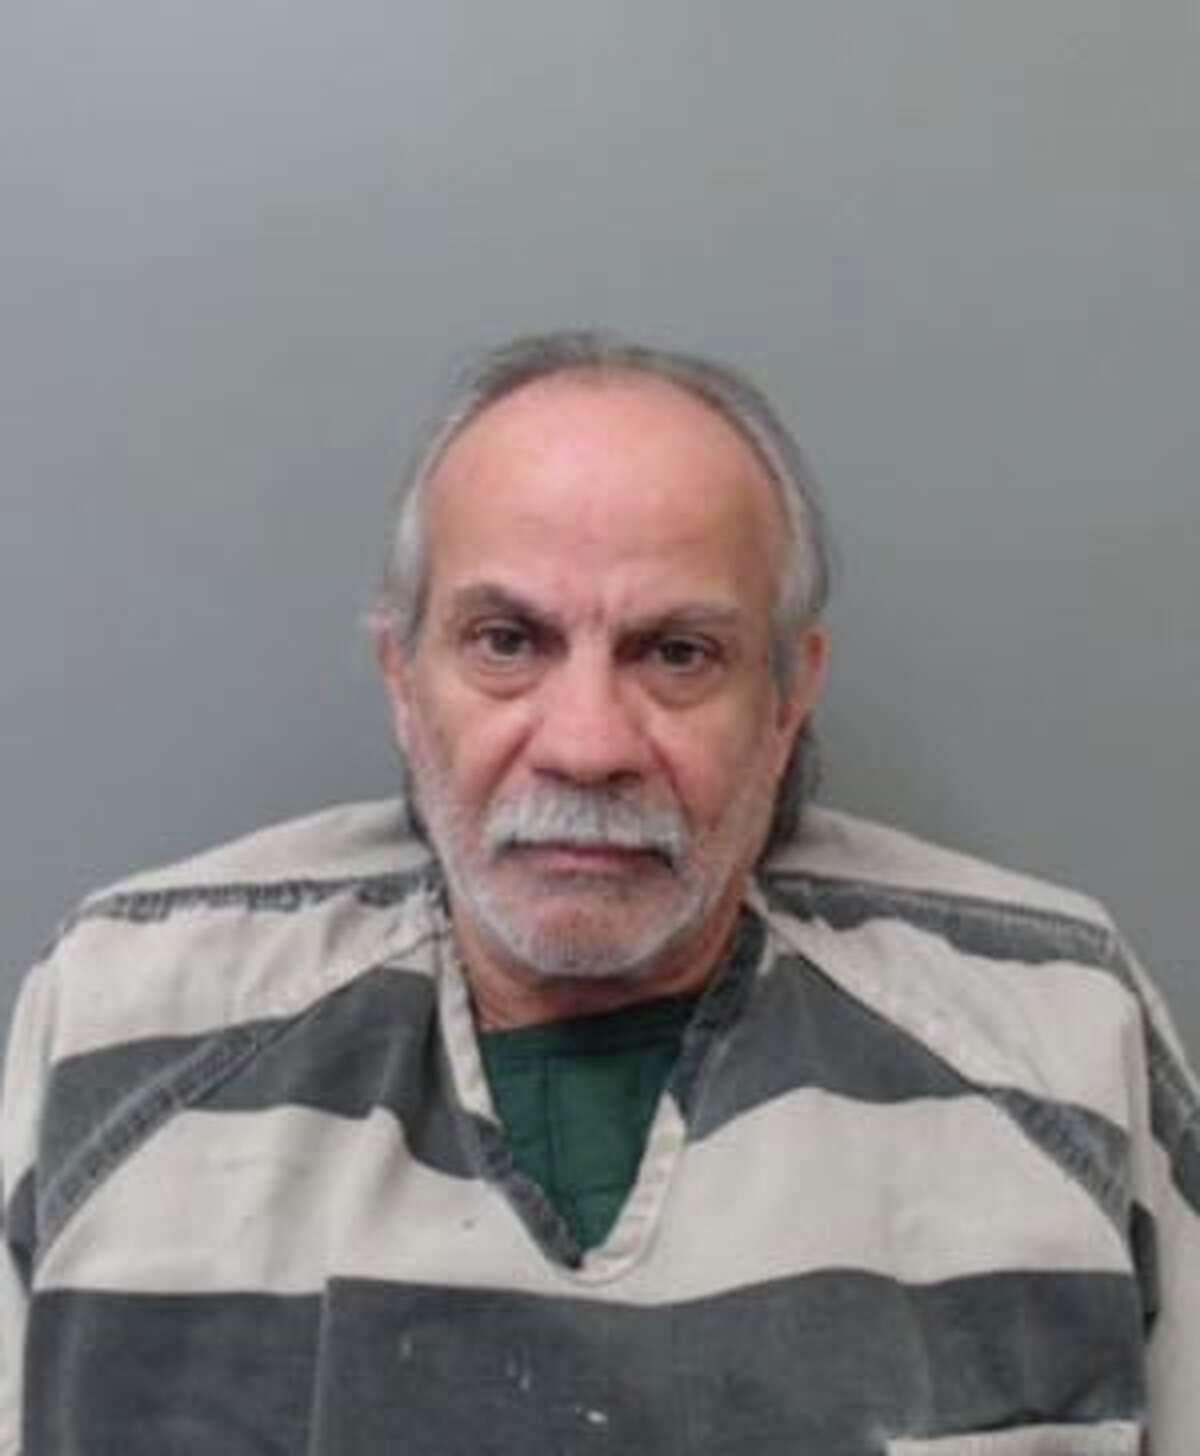 Eric John Hale, 60, was charged with aggravated assault on a public servant.